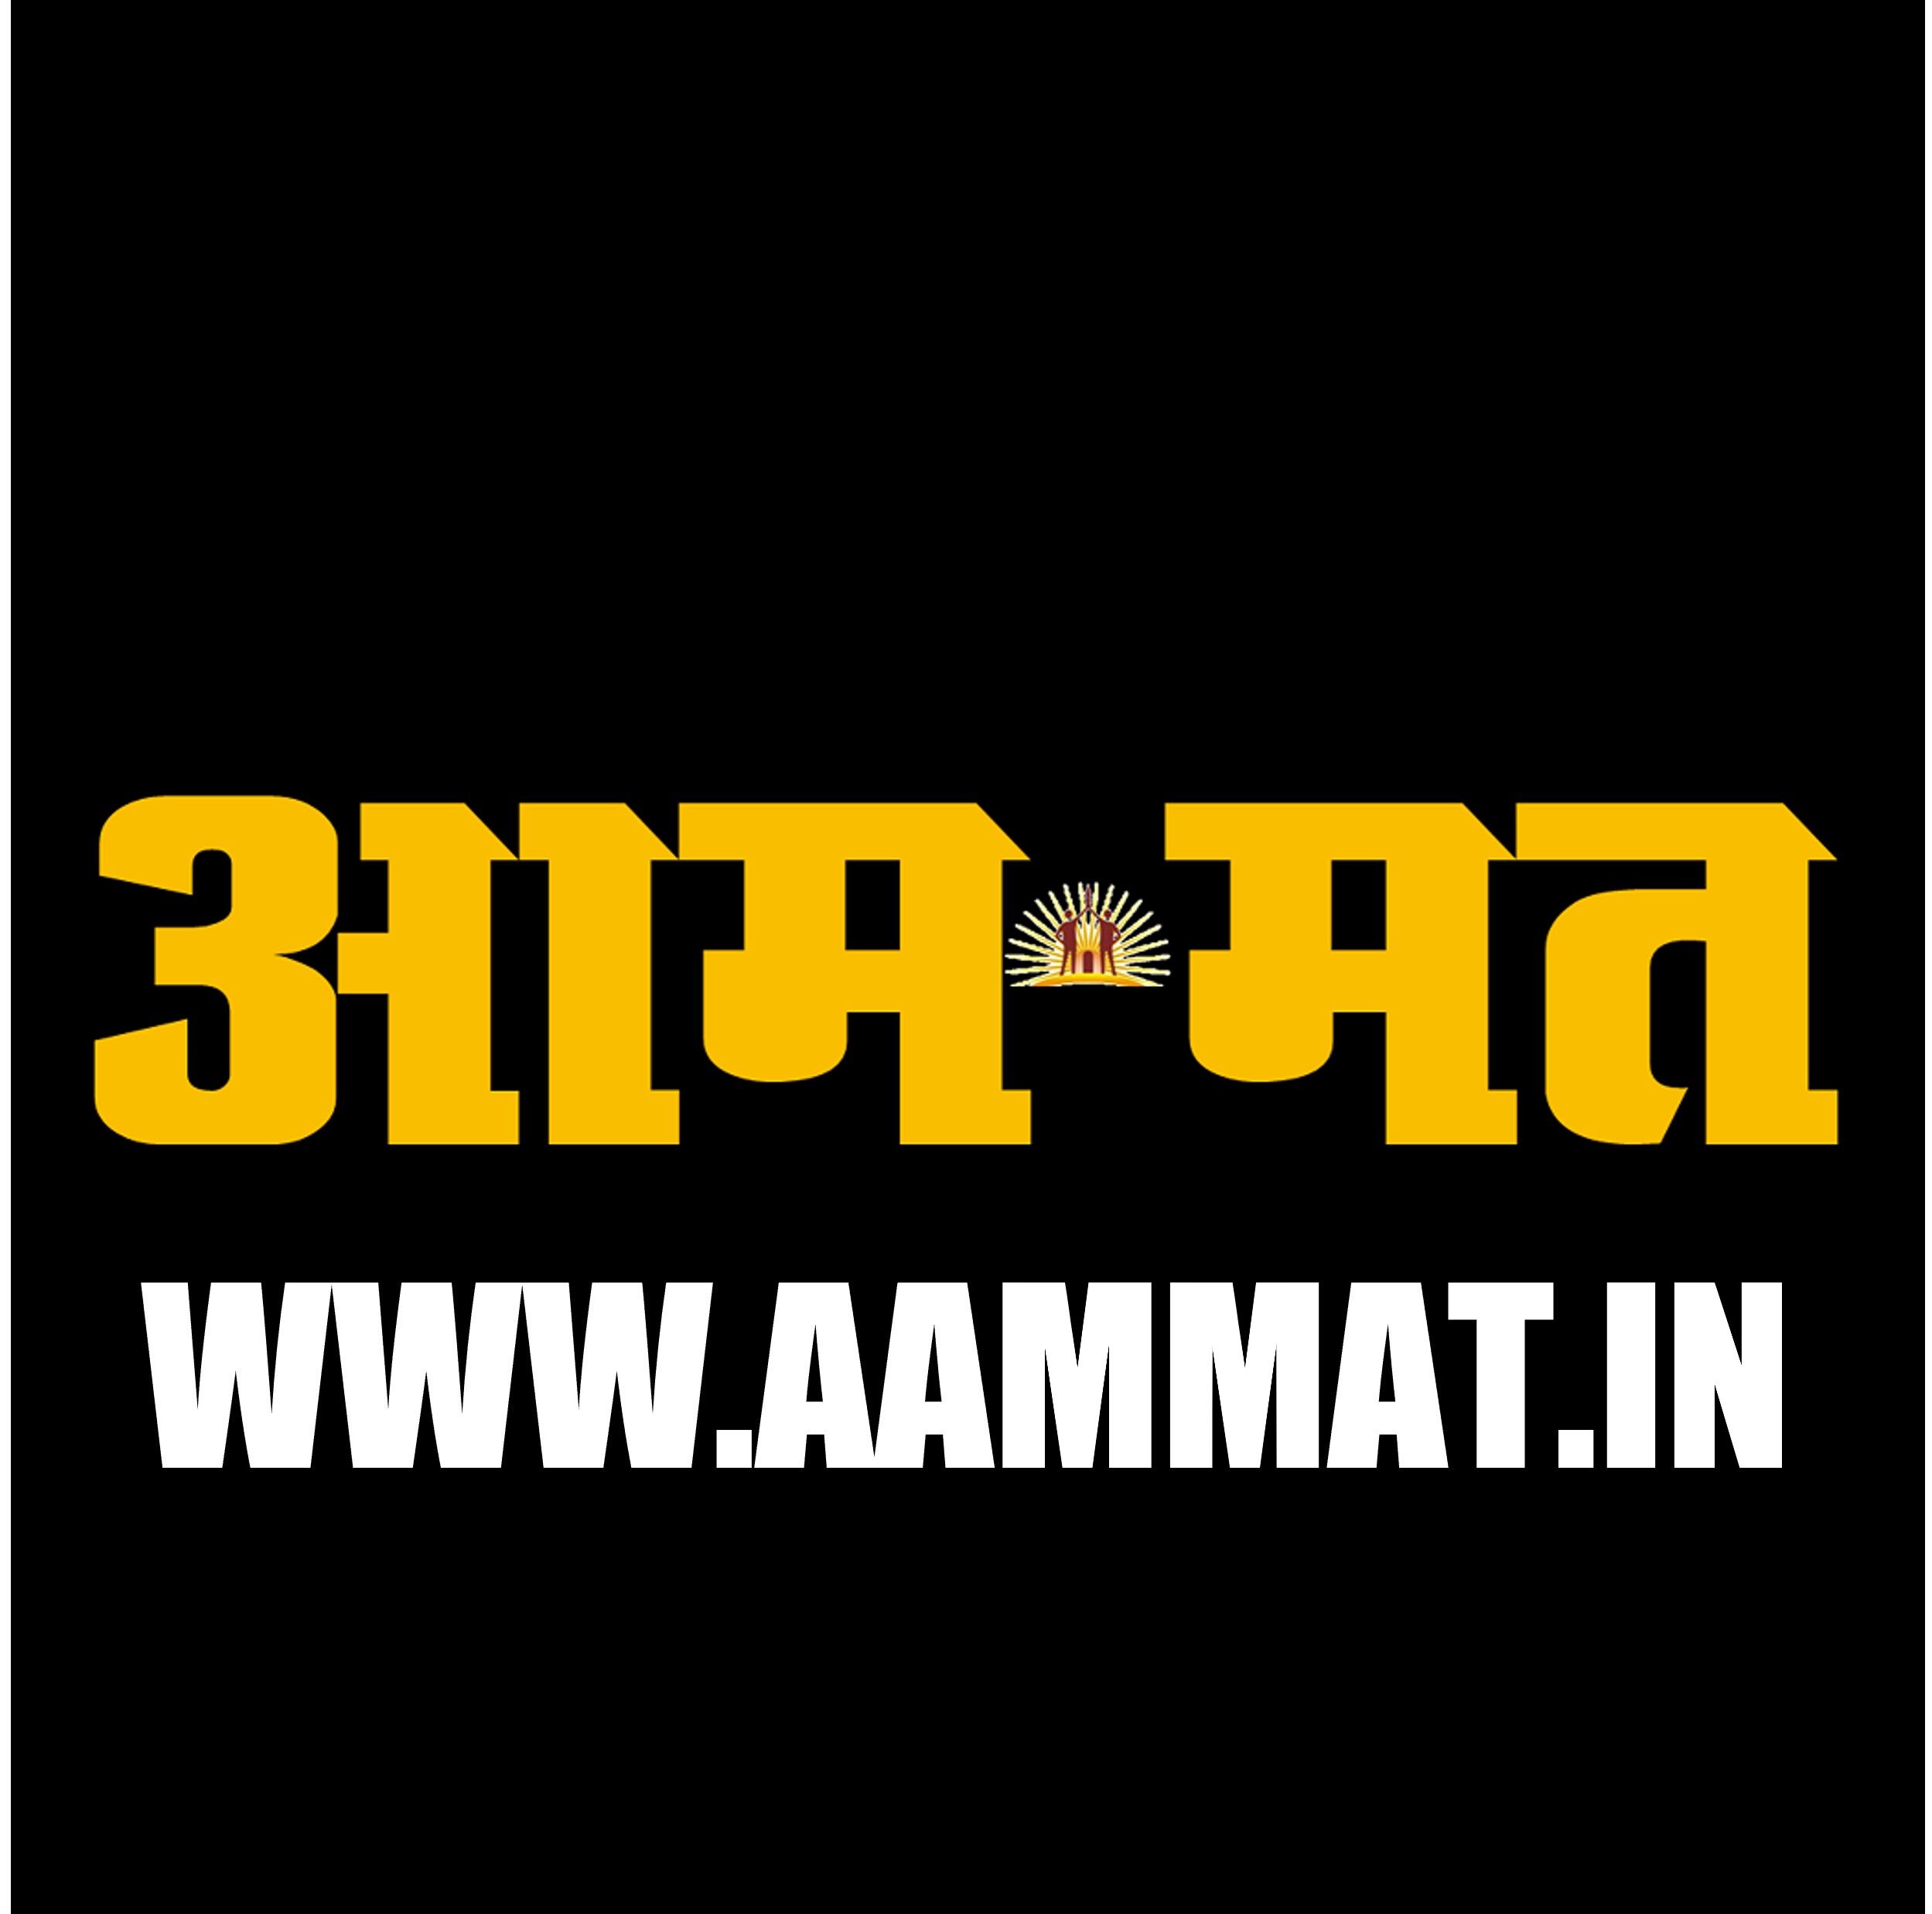 Latest Hindi News, Breaking News, Politics, Business, Career, National, International, Sports, Education, AAM MAT India NEWS Hindi Fortnightly Newspaper | Career in Journalism, How to become Journalist, Career in Media House, Job in Media House AAMMAT INDIA